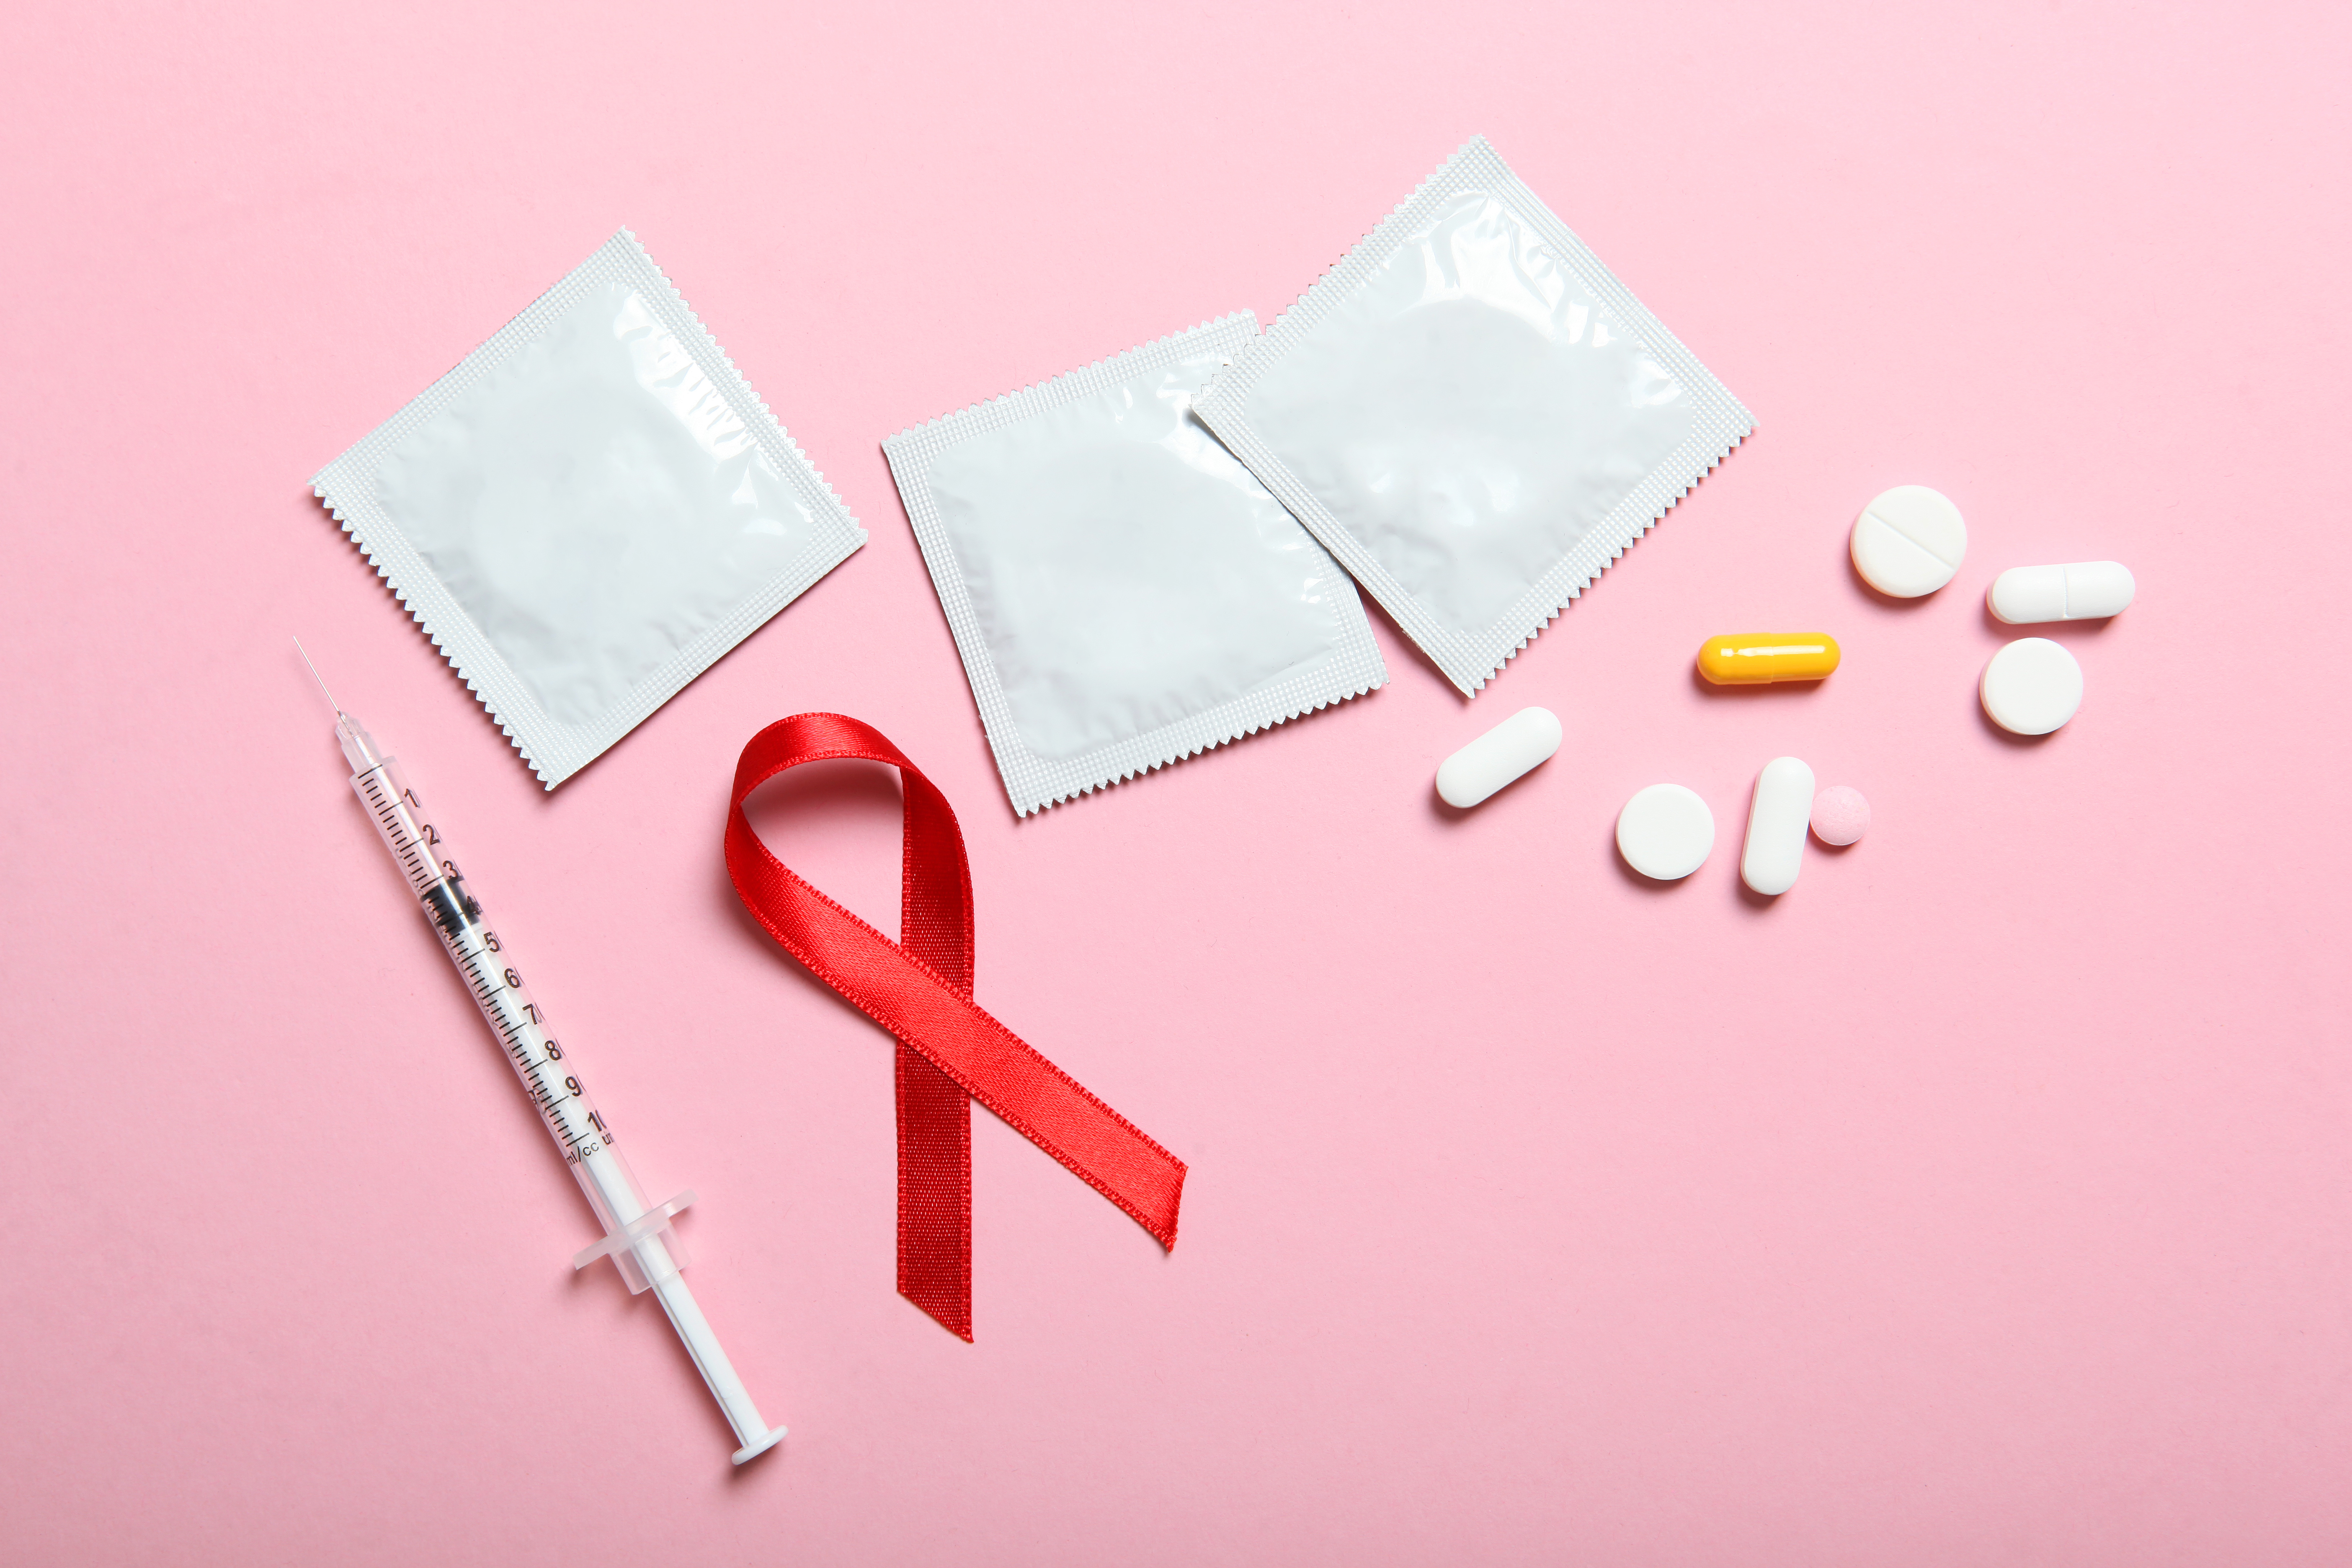 Image showing an injection, HIV day ribbon, condoms and medication